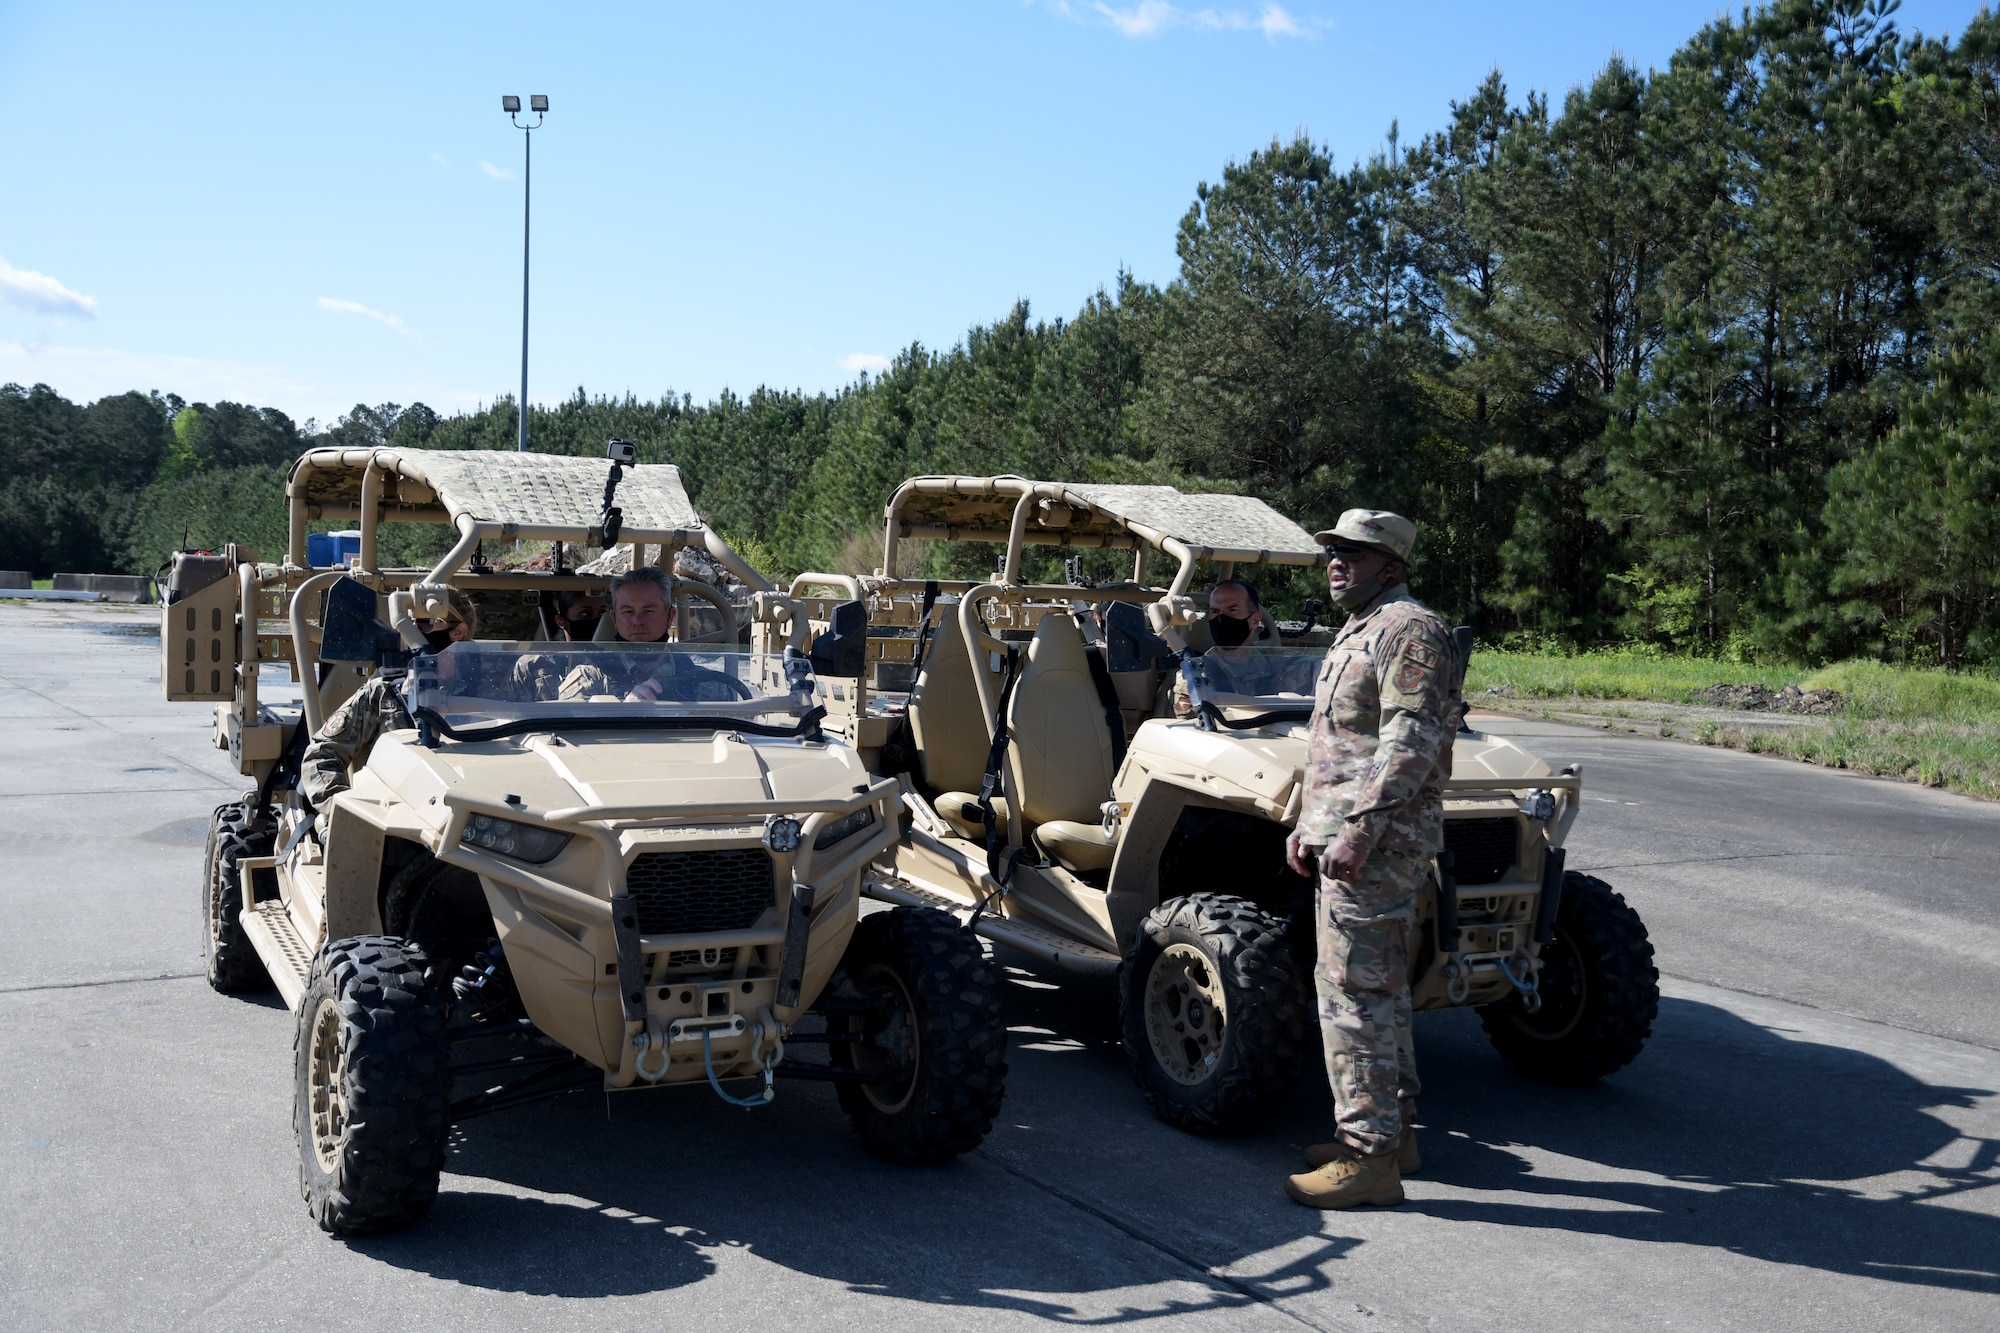 Maj. Gen. John P. Healy, 22nd Air Force commander, and Col. Craig McPike, 94th Airlift Wing commander, drive RZR off road vehicles during a tour at Dobbins Air Reserve Base, Ga, on April 11, 2021. (U.S. Air Force Photo by Staff Sgt. Justin Clayvon)